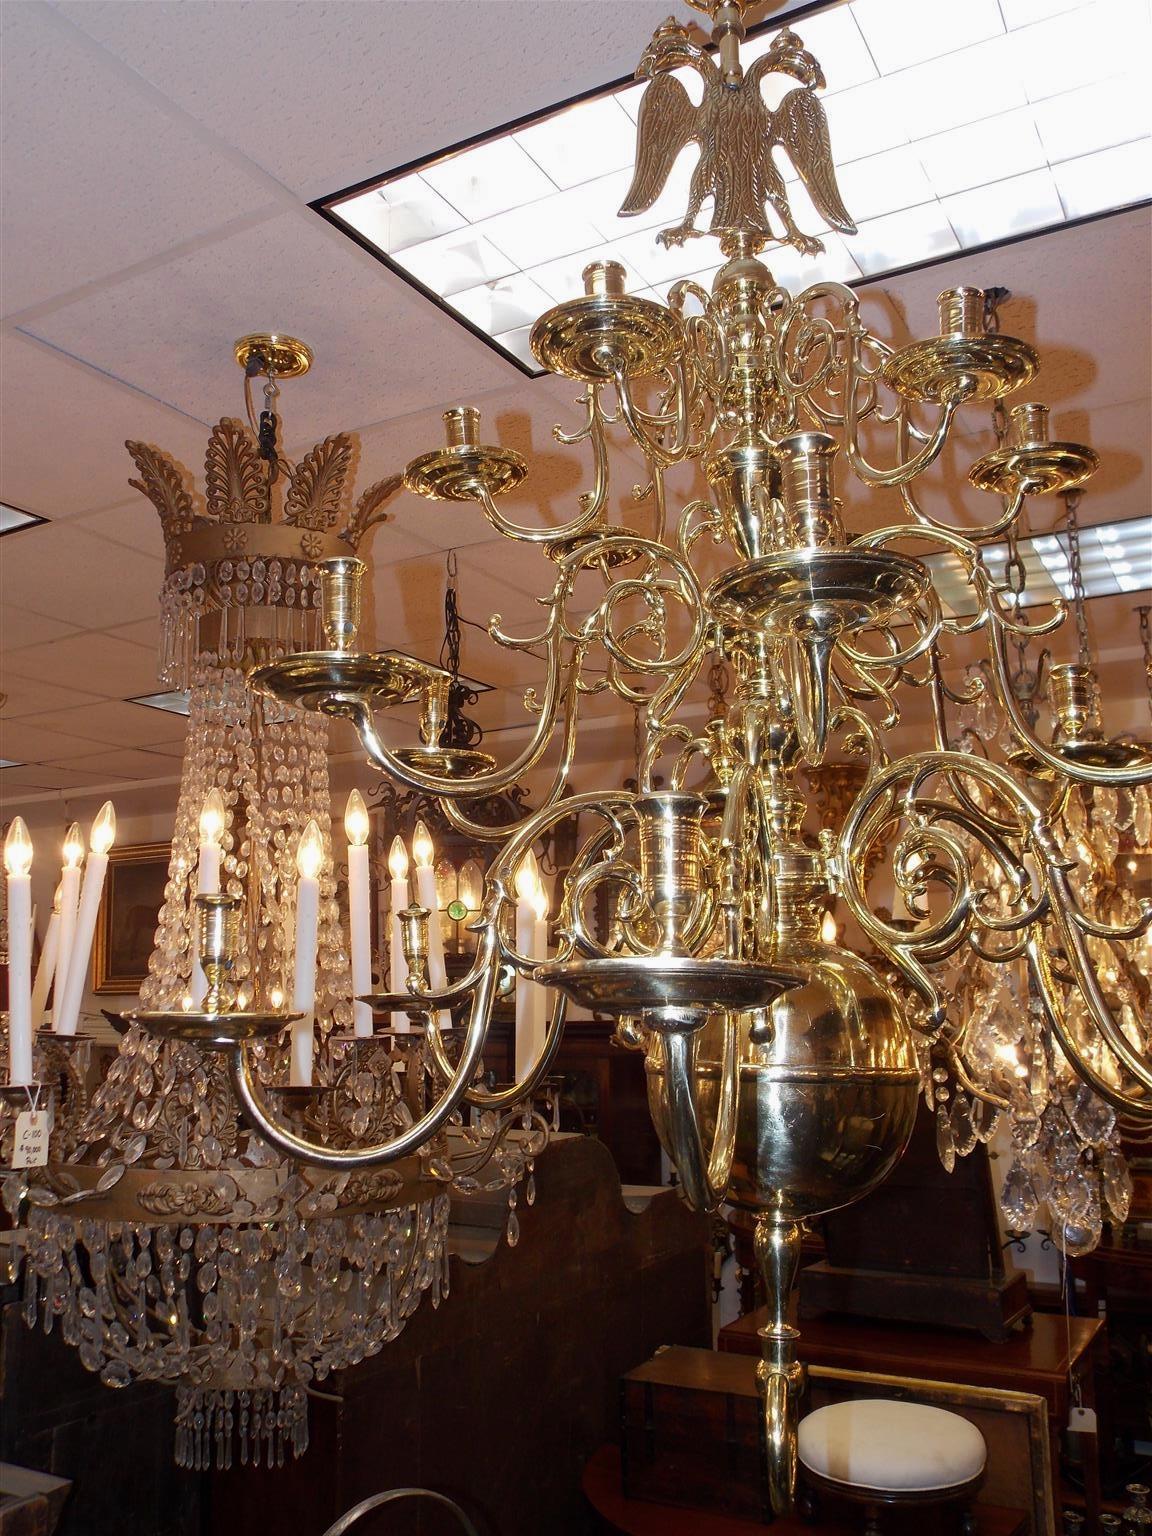 Dutch Colonial brass three-tiered eighteen light chandelier with double headed eagle medallion, scrolled decorative arms, original bobeches, centered bulbous column and terminating on a large lower ringed ball with ring finial. Chandelier is candle